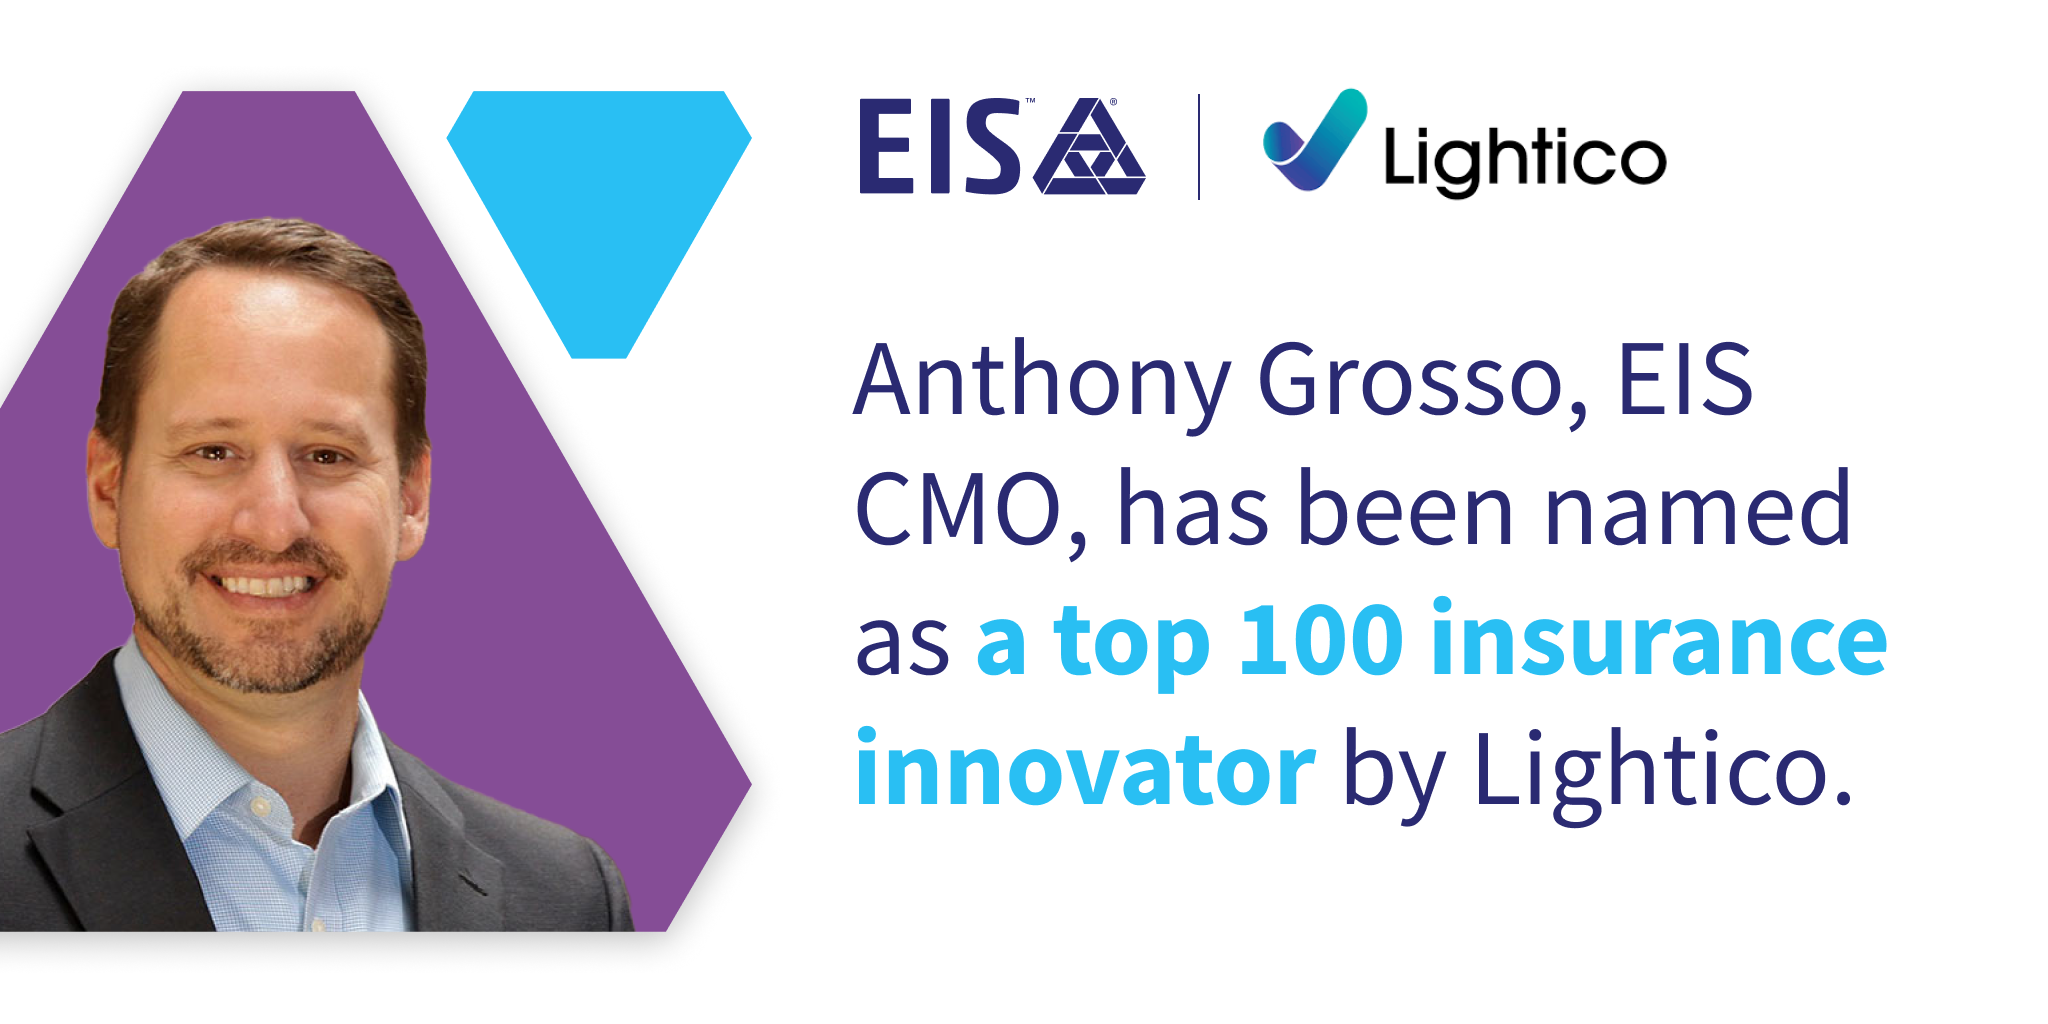 Anthony Grosso of EIS Ranked Among Top 100 Insurance Innovators by Lightico